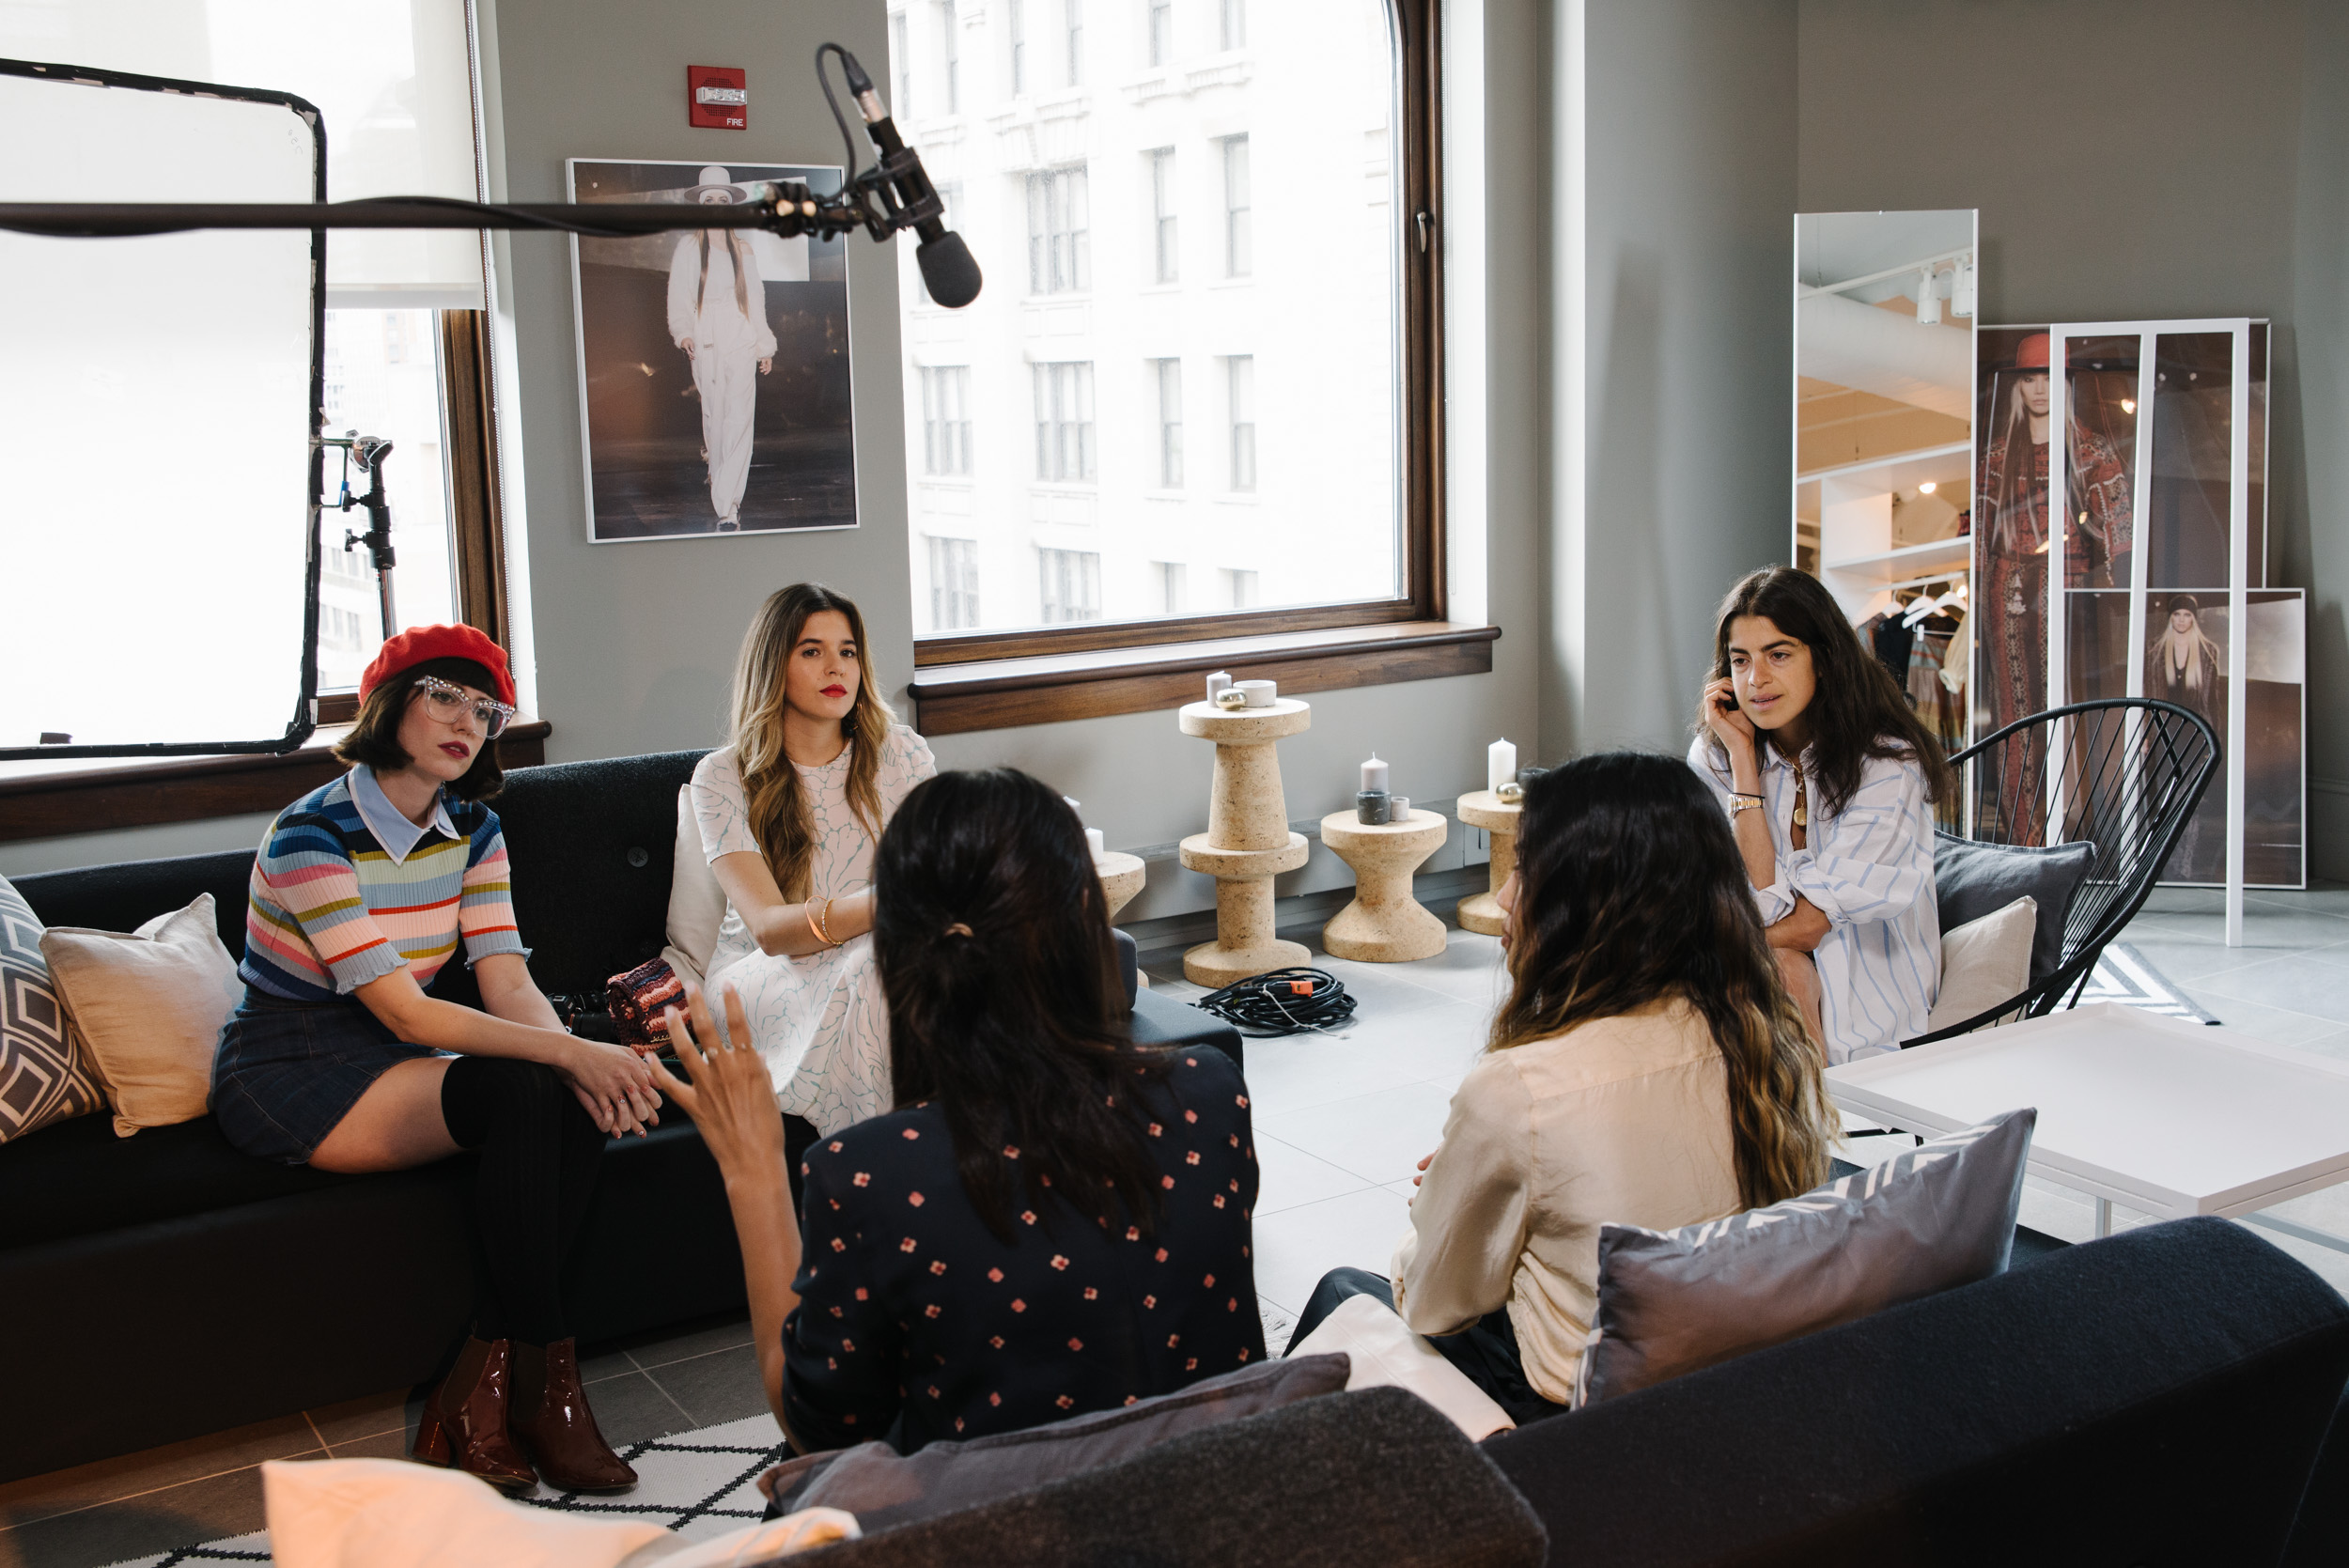 Leandra Medine and the nominees for the 2016 Bloglovin Awards' Breakthrough Fashion Blogger of the Year category